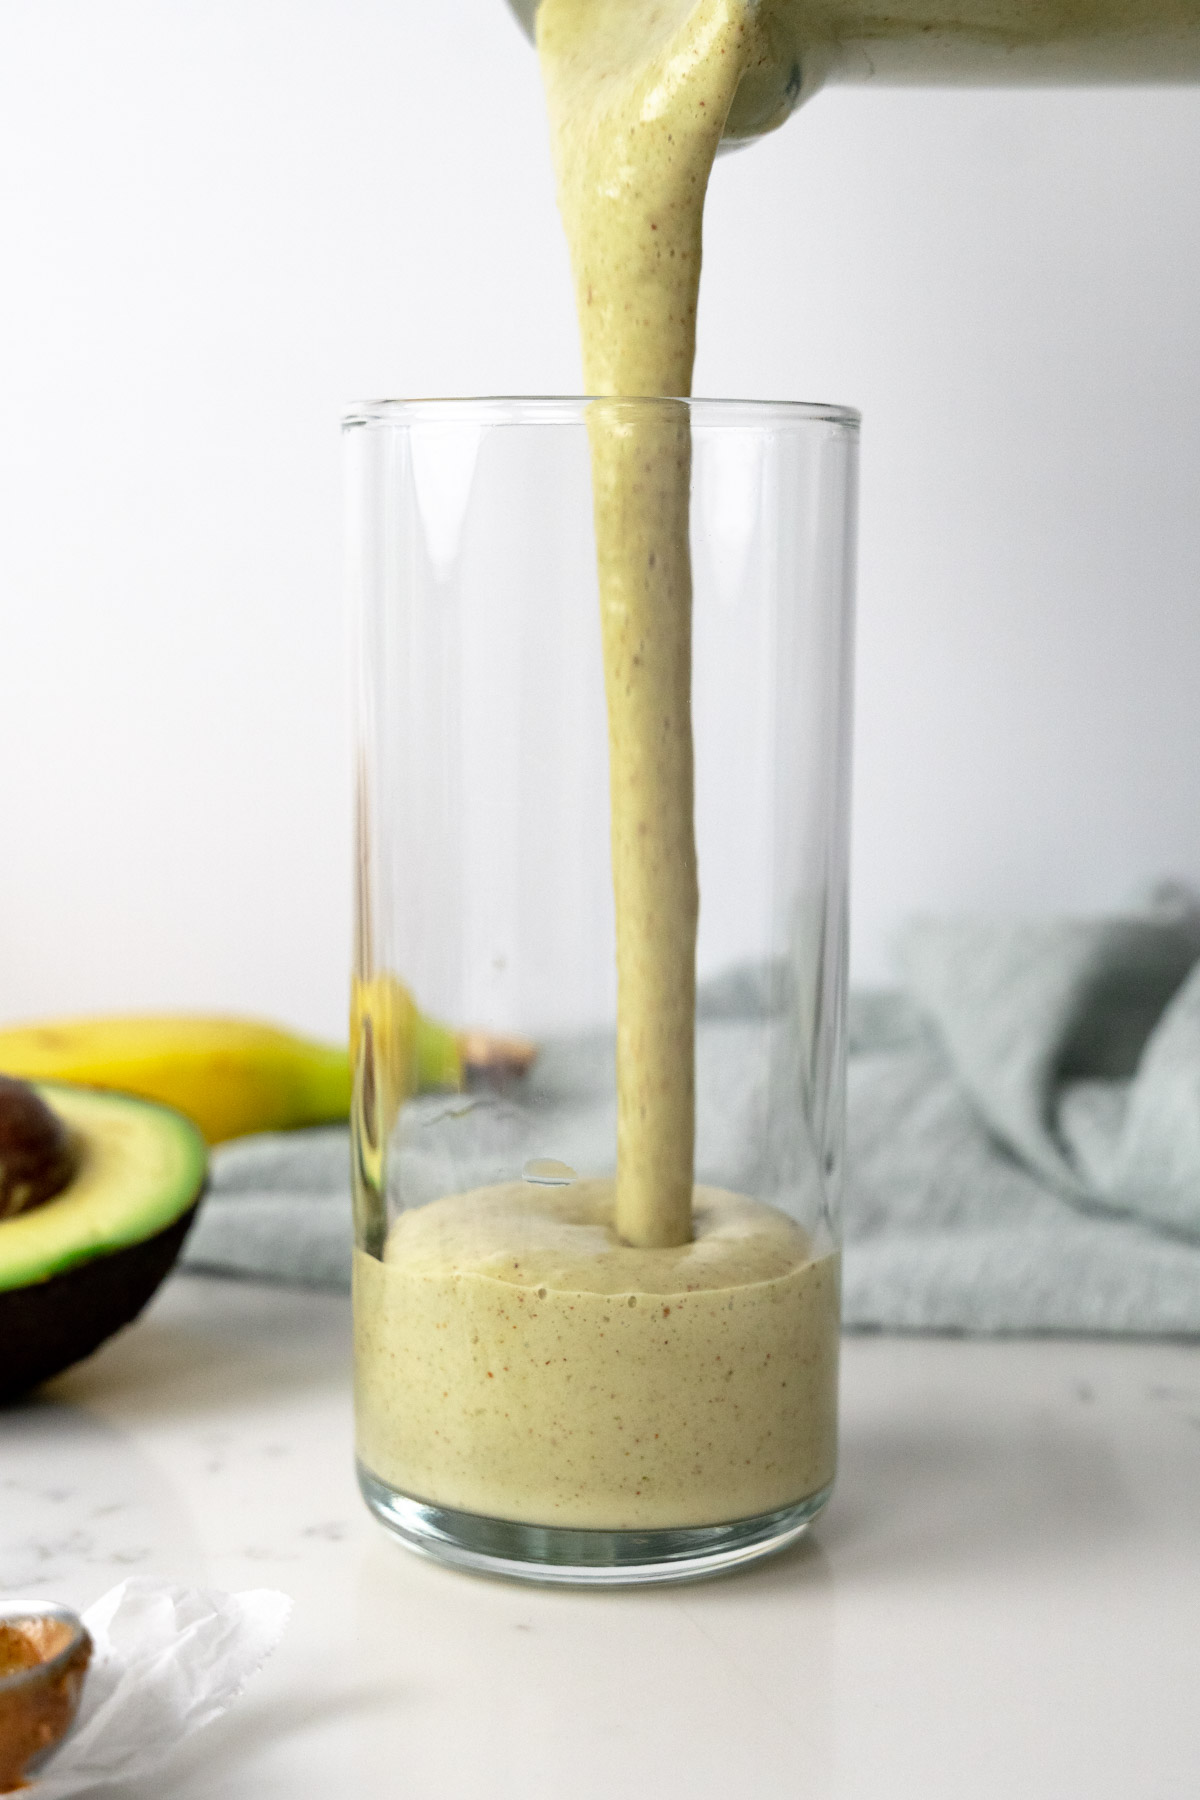 Banana avocado smoothie being poured into a glass cup